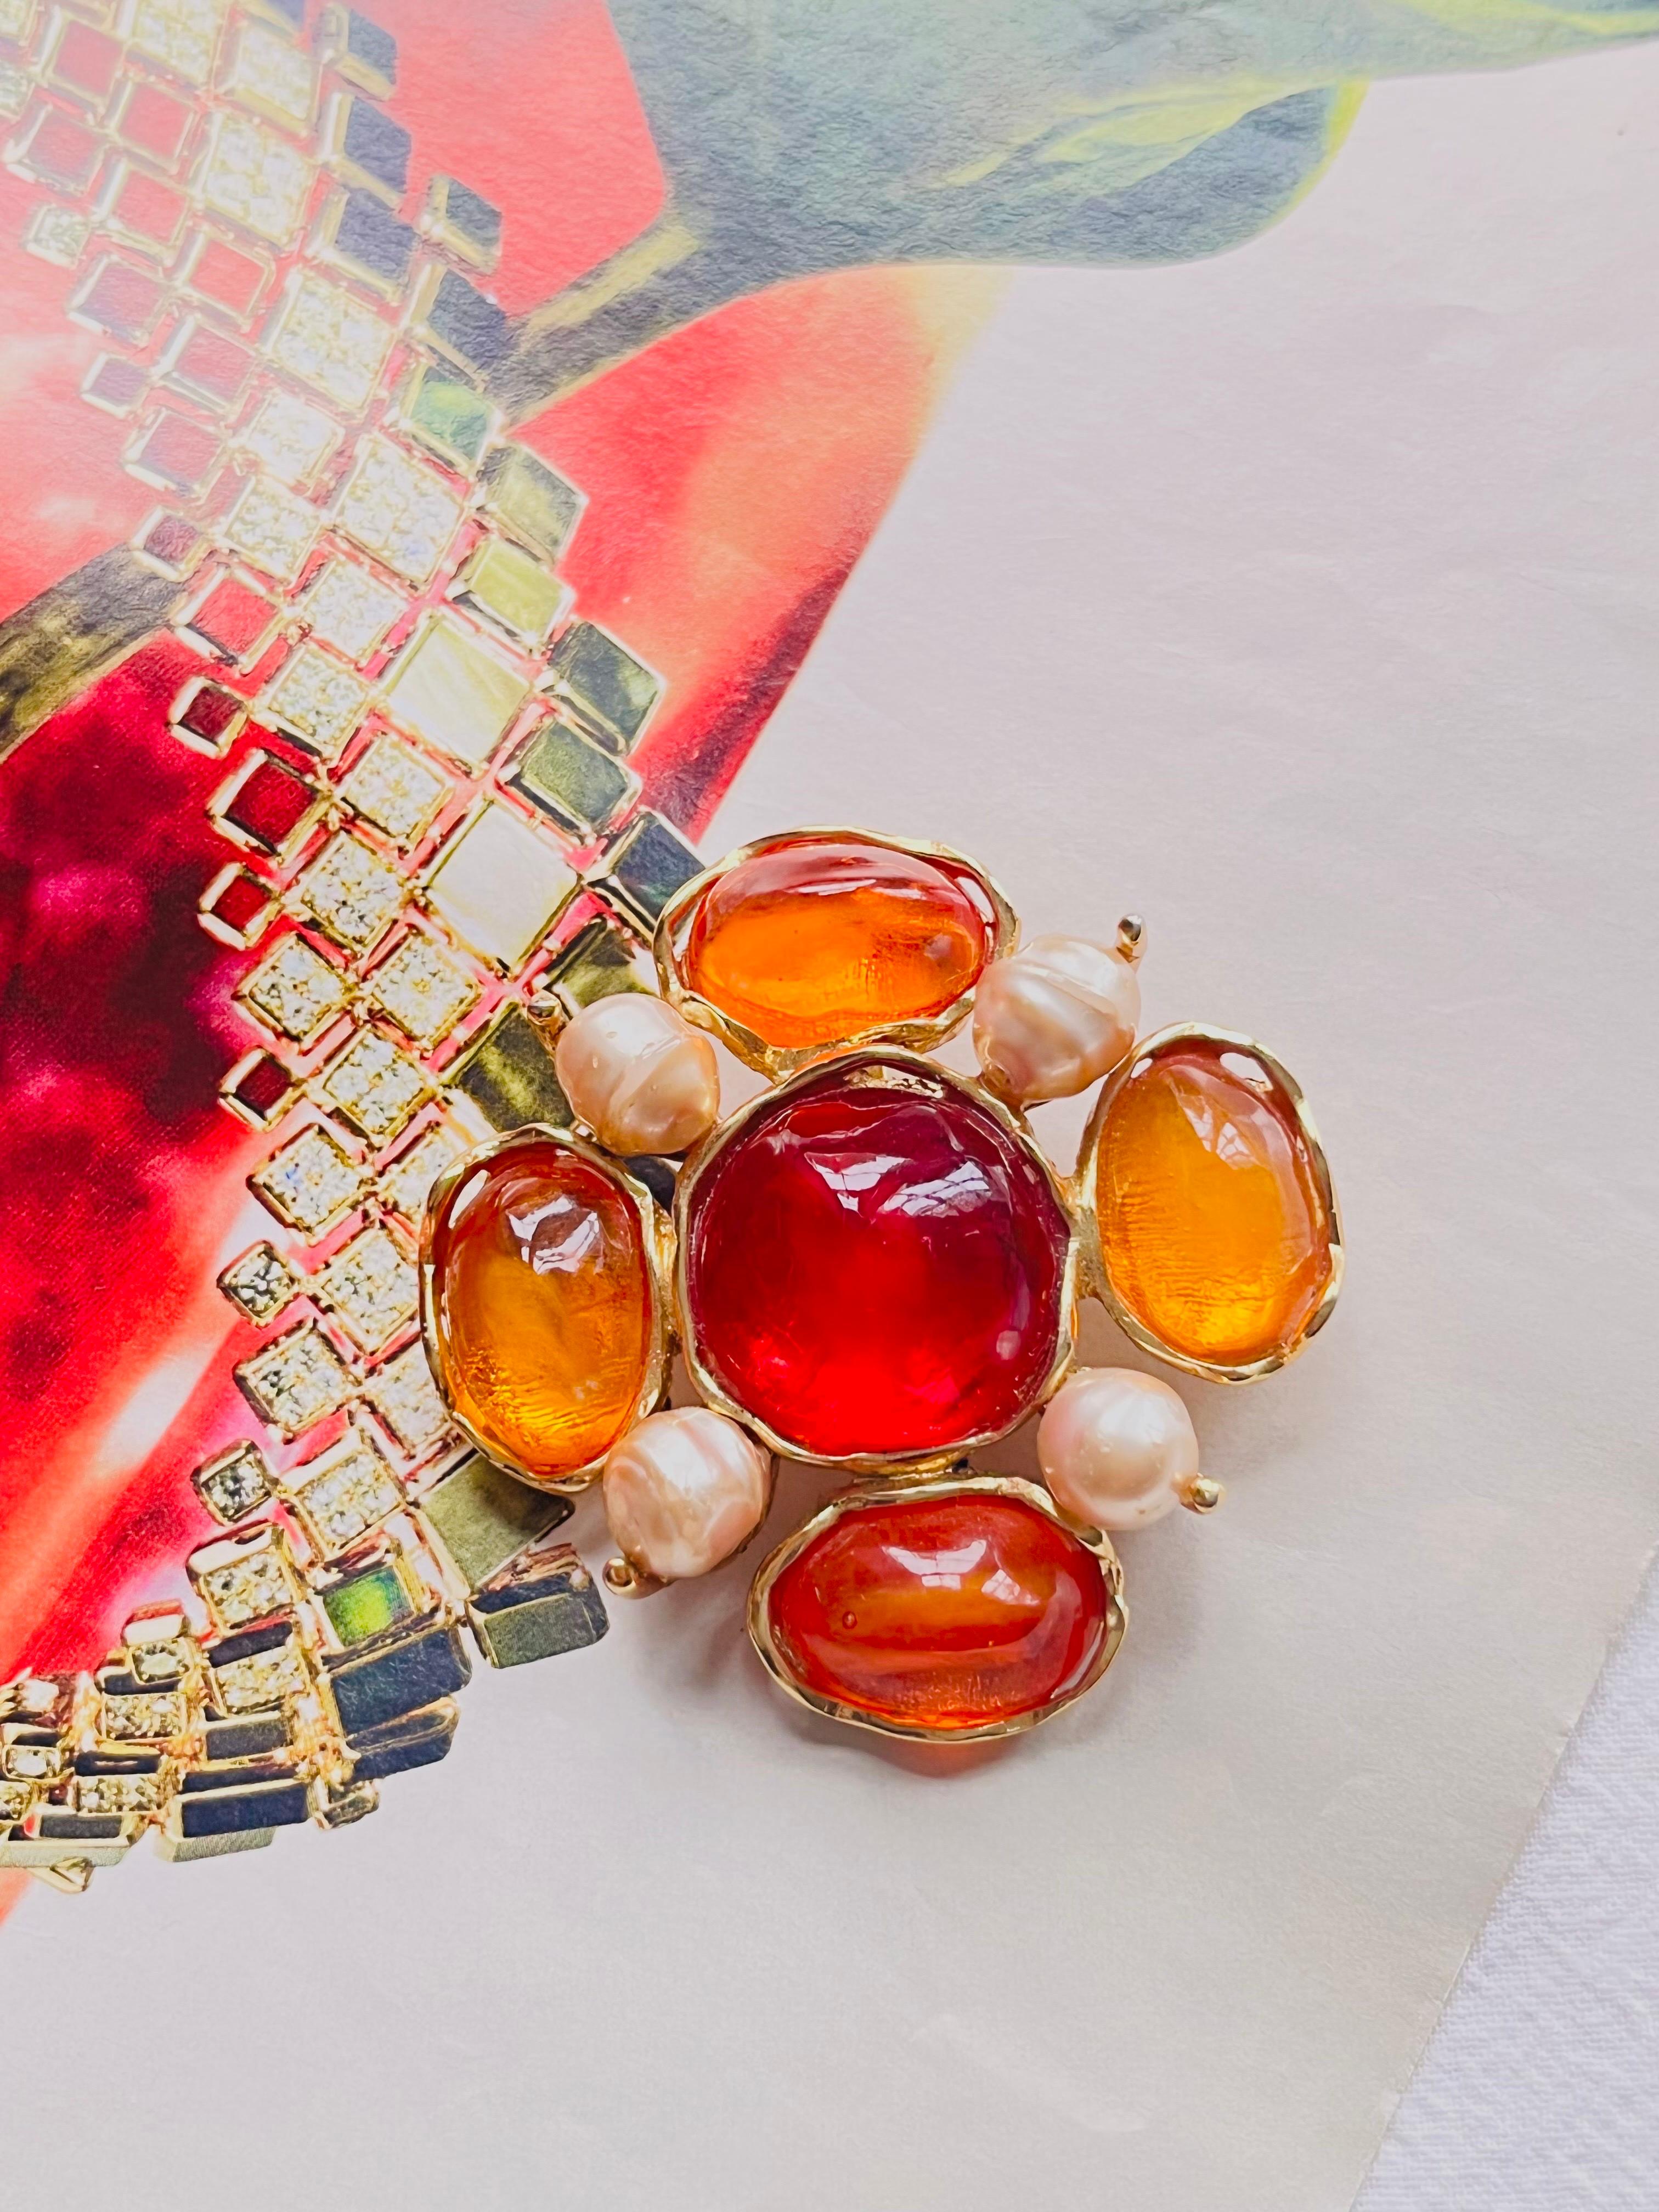 Yves Saint Laurent YSL Large Gripoix Orange Ruby Crystals Pearls Pendant Brooch In Excellent Condition For Sale In Wokingham, England